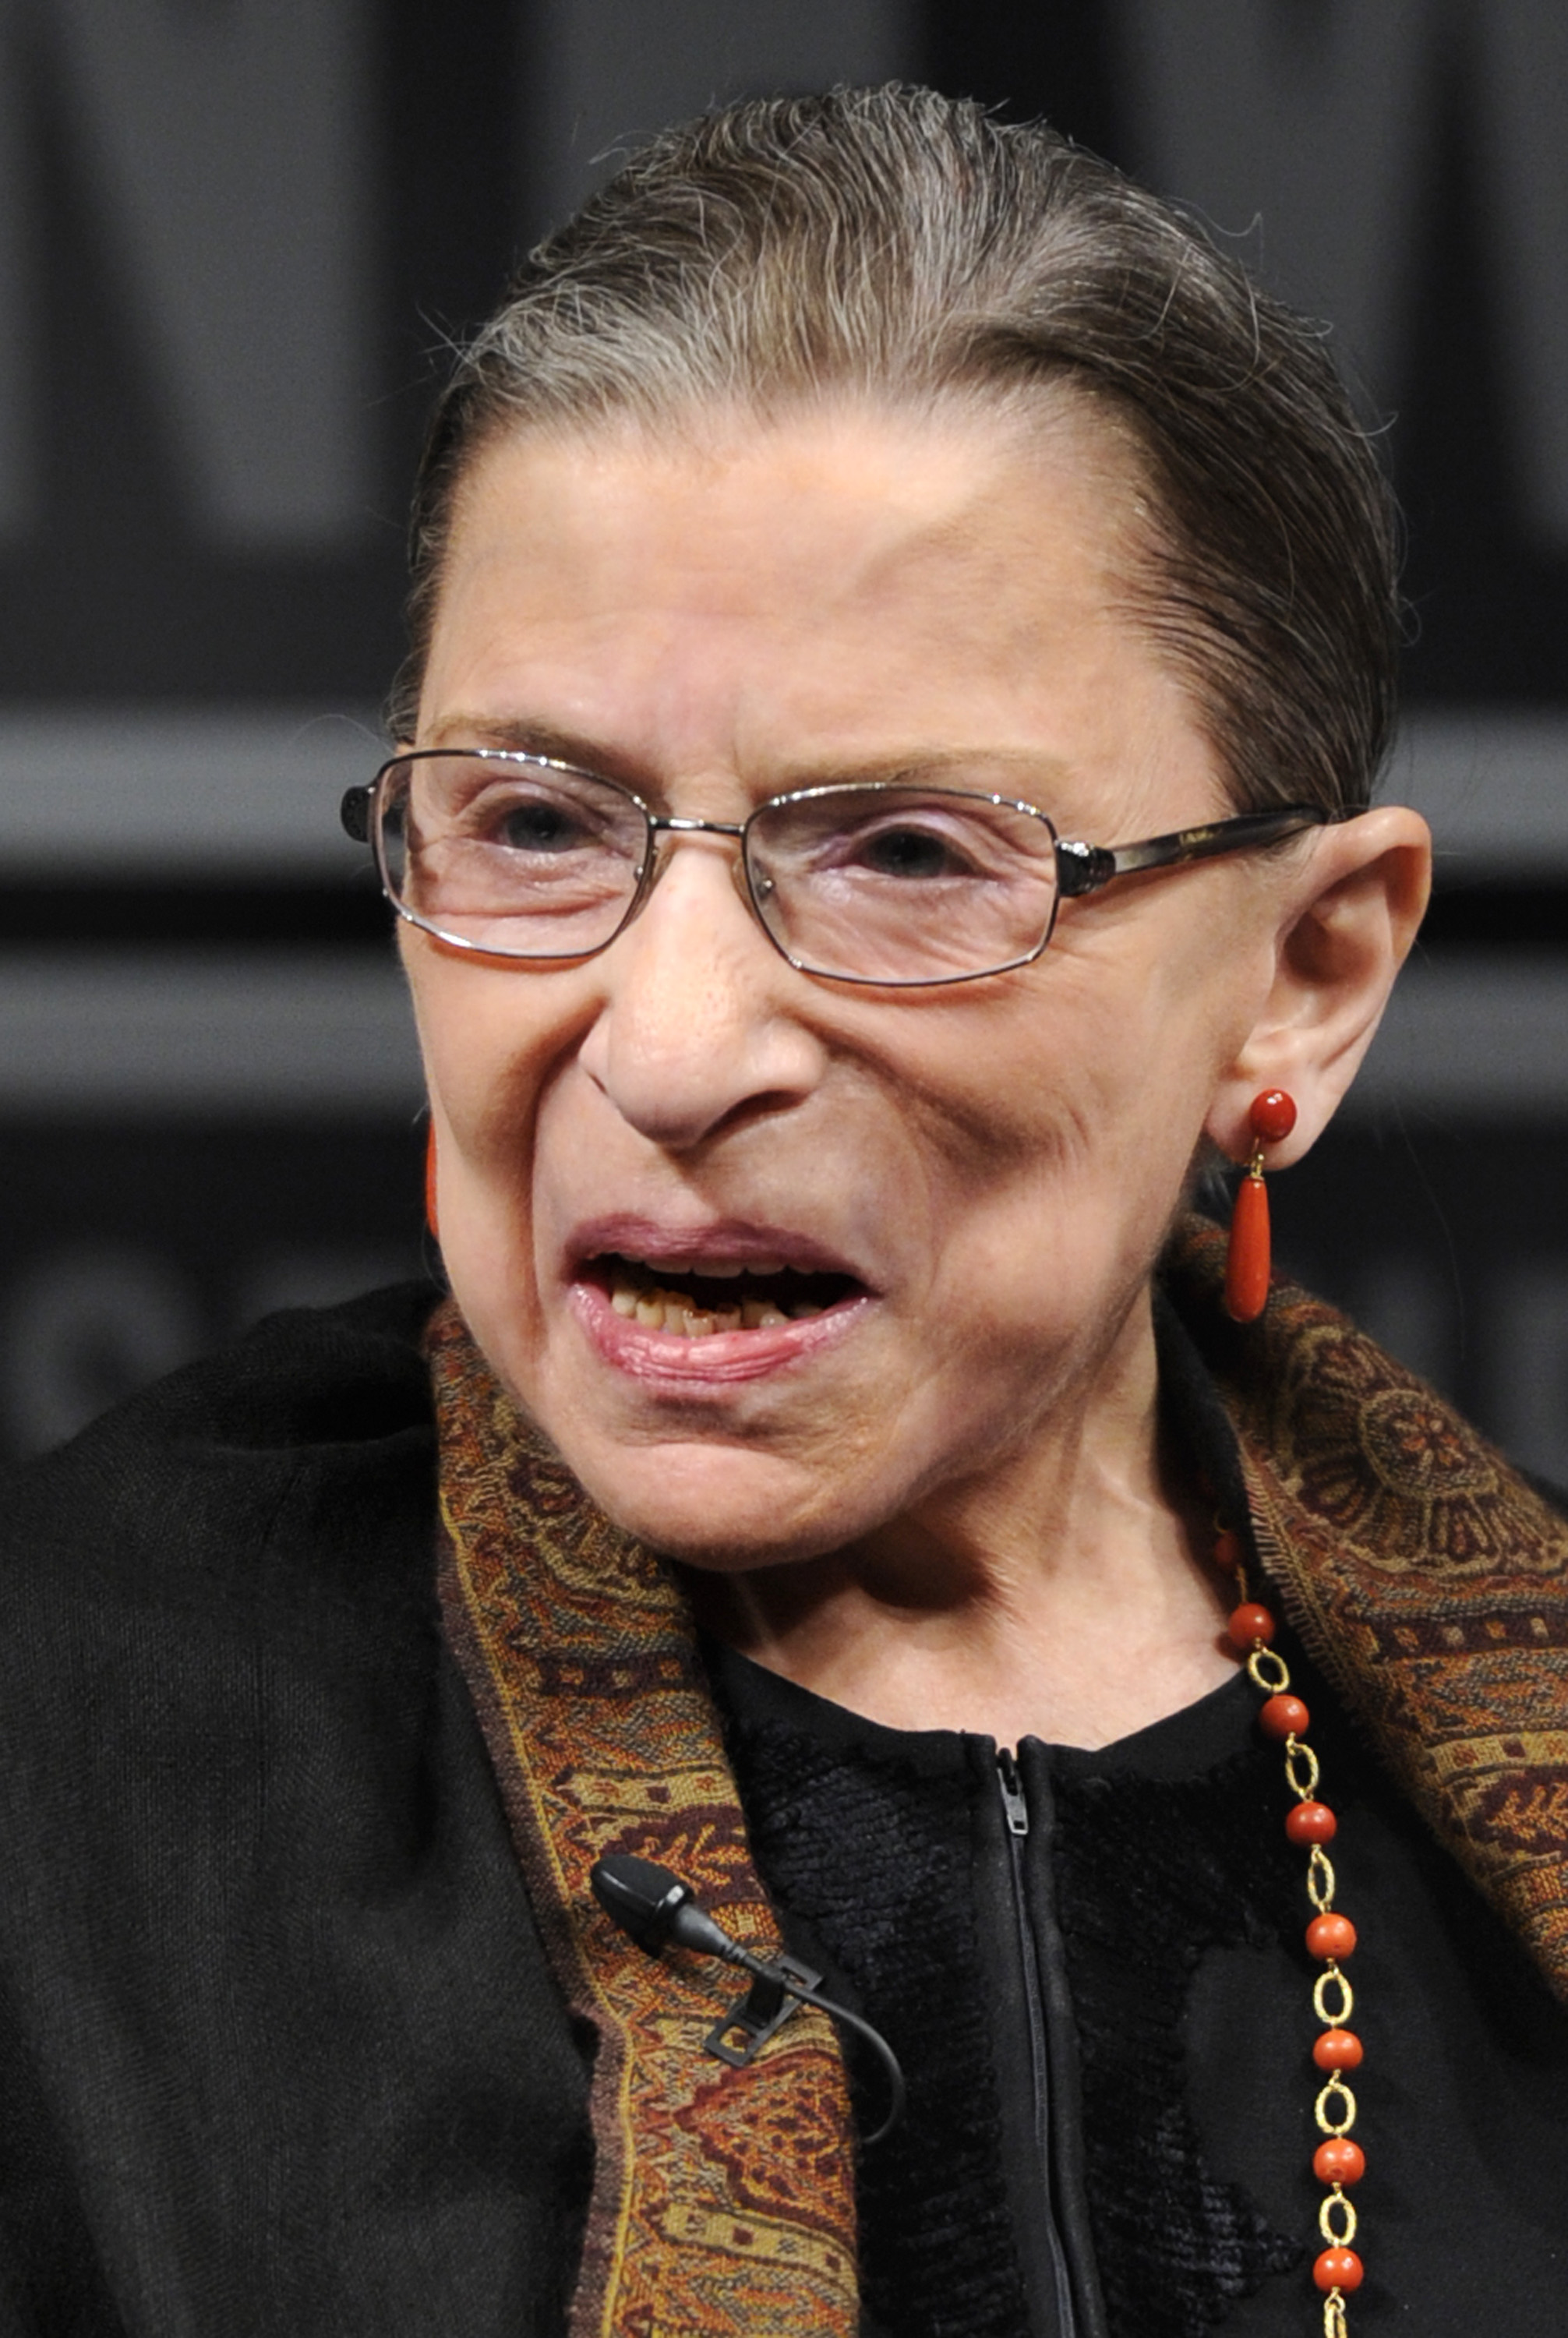 Supreme Court Justice Ruth Bader Ginsburg makes remarks during a forum at the Newseum to mark the 30th anniversary of the first female Justice Sandra Day O'Connor's first term on the Supreme Court in Washington, DC, April 11, 2012. (Mike Theiler—REUTERS)